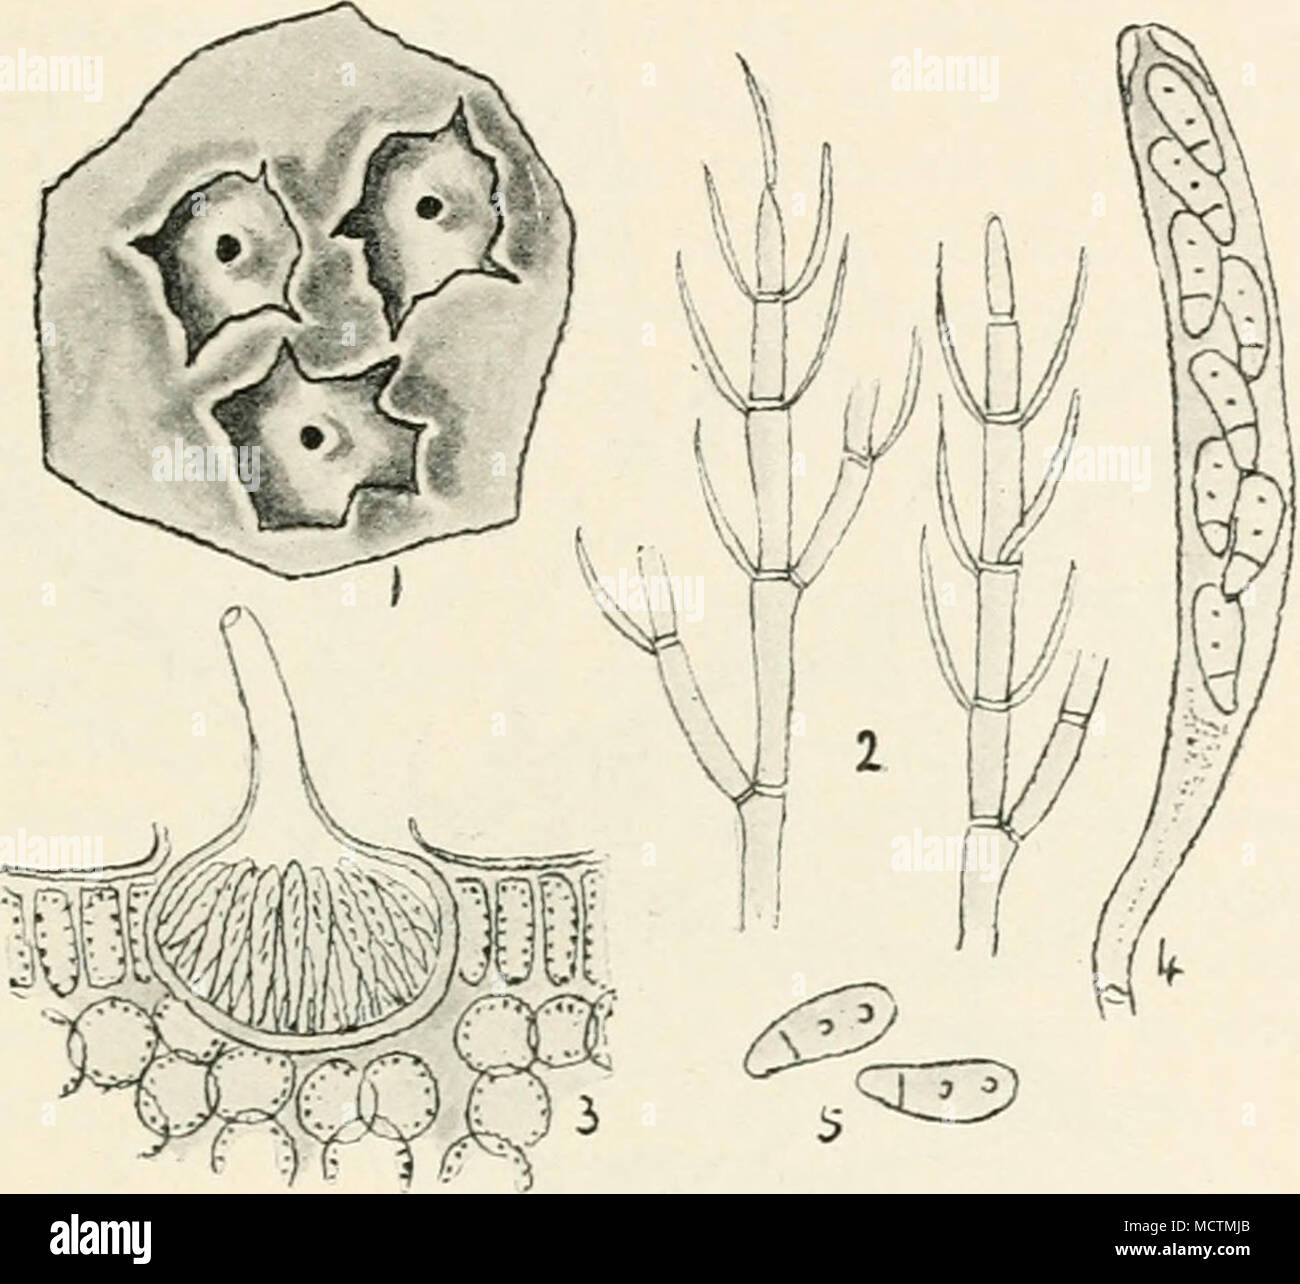 . Fig. 55.—Gnomonia erythrostoma. i, conceptacles containing spermatia bursting through the epidermis of a leaf; 2, spermatia ; 3, section of perithecium of ascospore stage ; 4, ascus containing spores ; 5, free spores. All mag. from one orchard to another. Frank records an instance in Prussia where the cherry industry was completely wrecked by this disease, but after two years' work in collecting and burn- ing all infected leaves, the epidemic was thoroughly stamped out, and a return to the former productiveness followed. Wild cherries growing in woods and the bird cherry {Friinus avium) are  Stock Photo